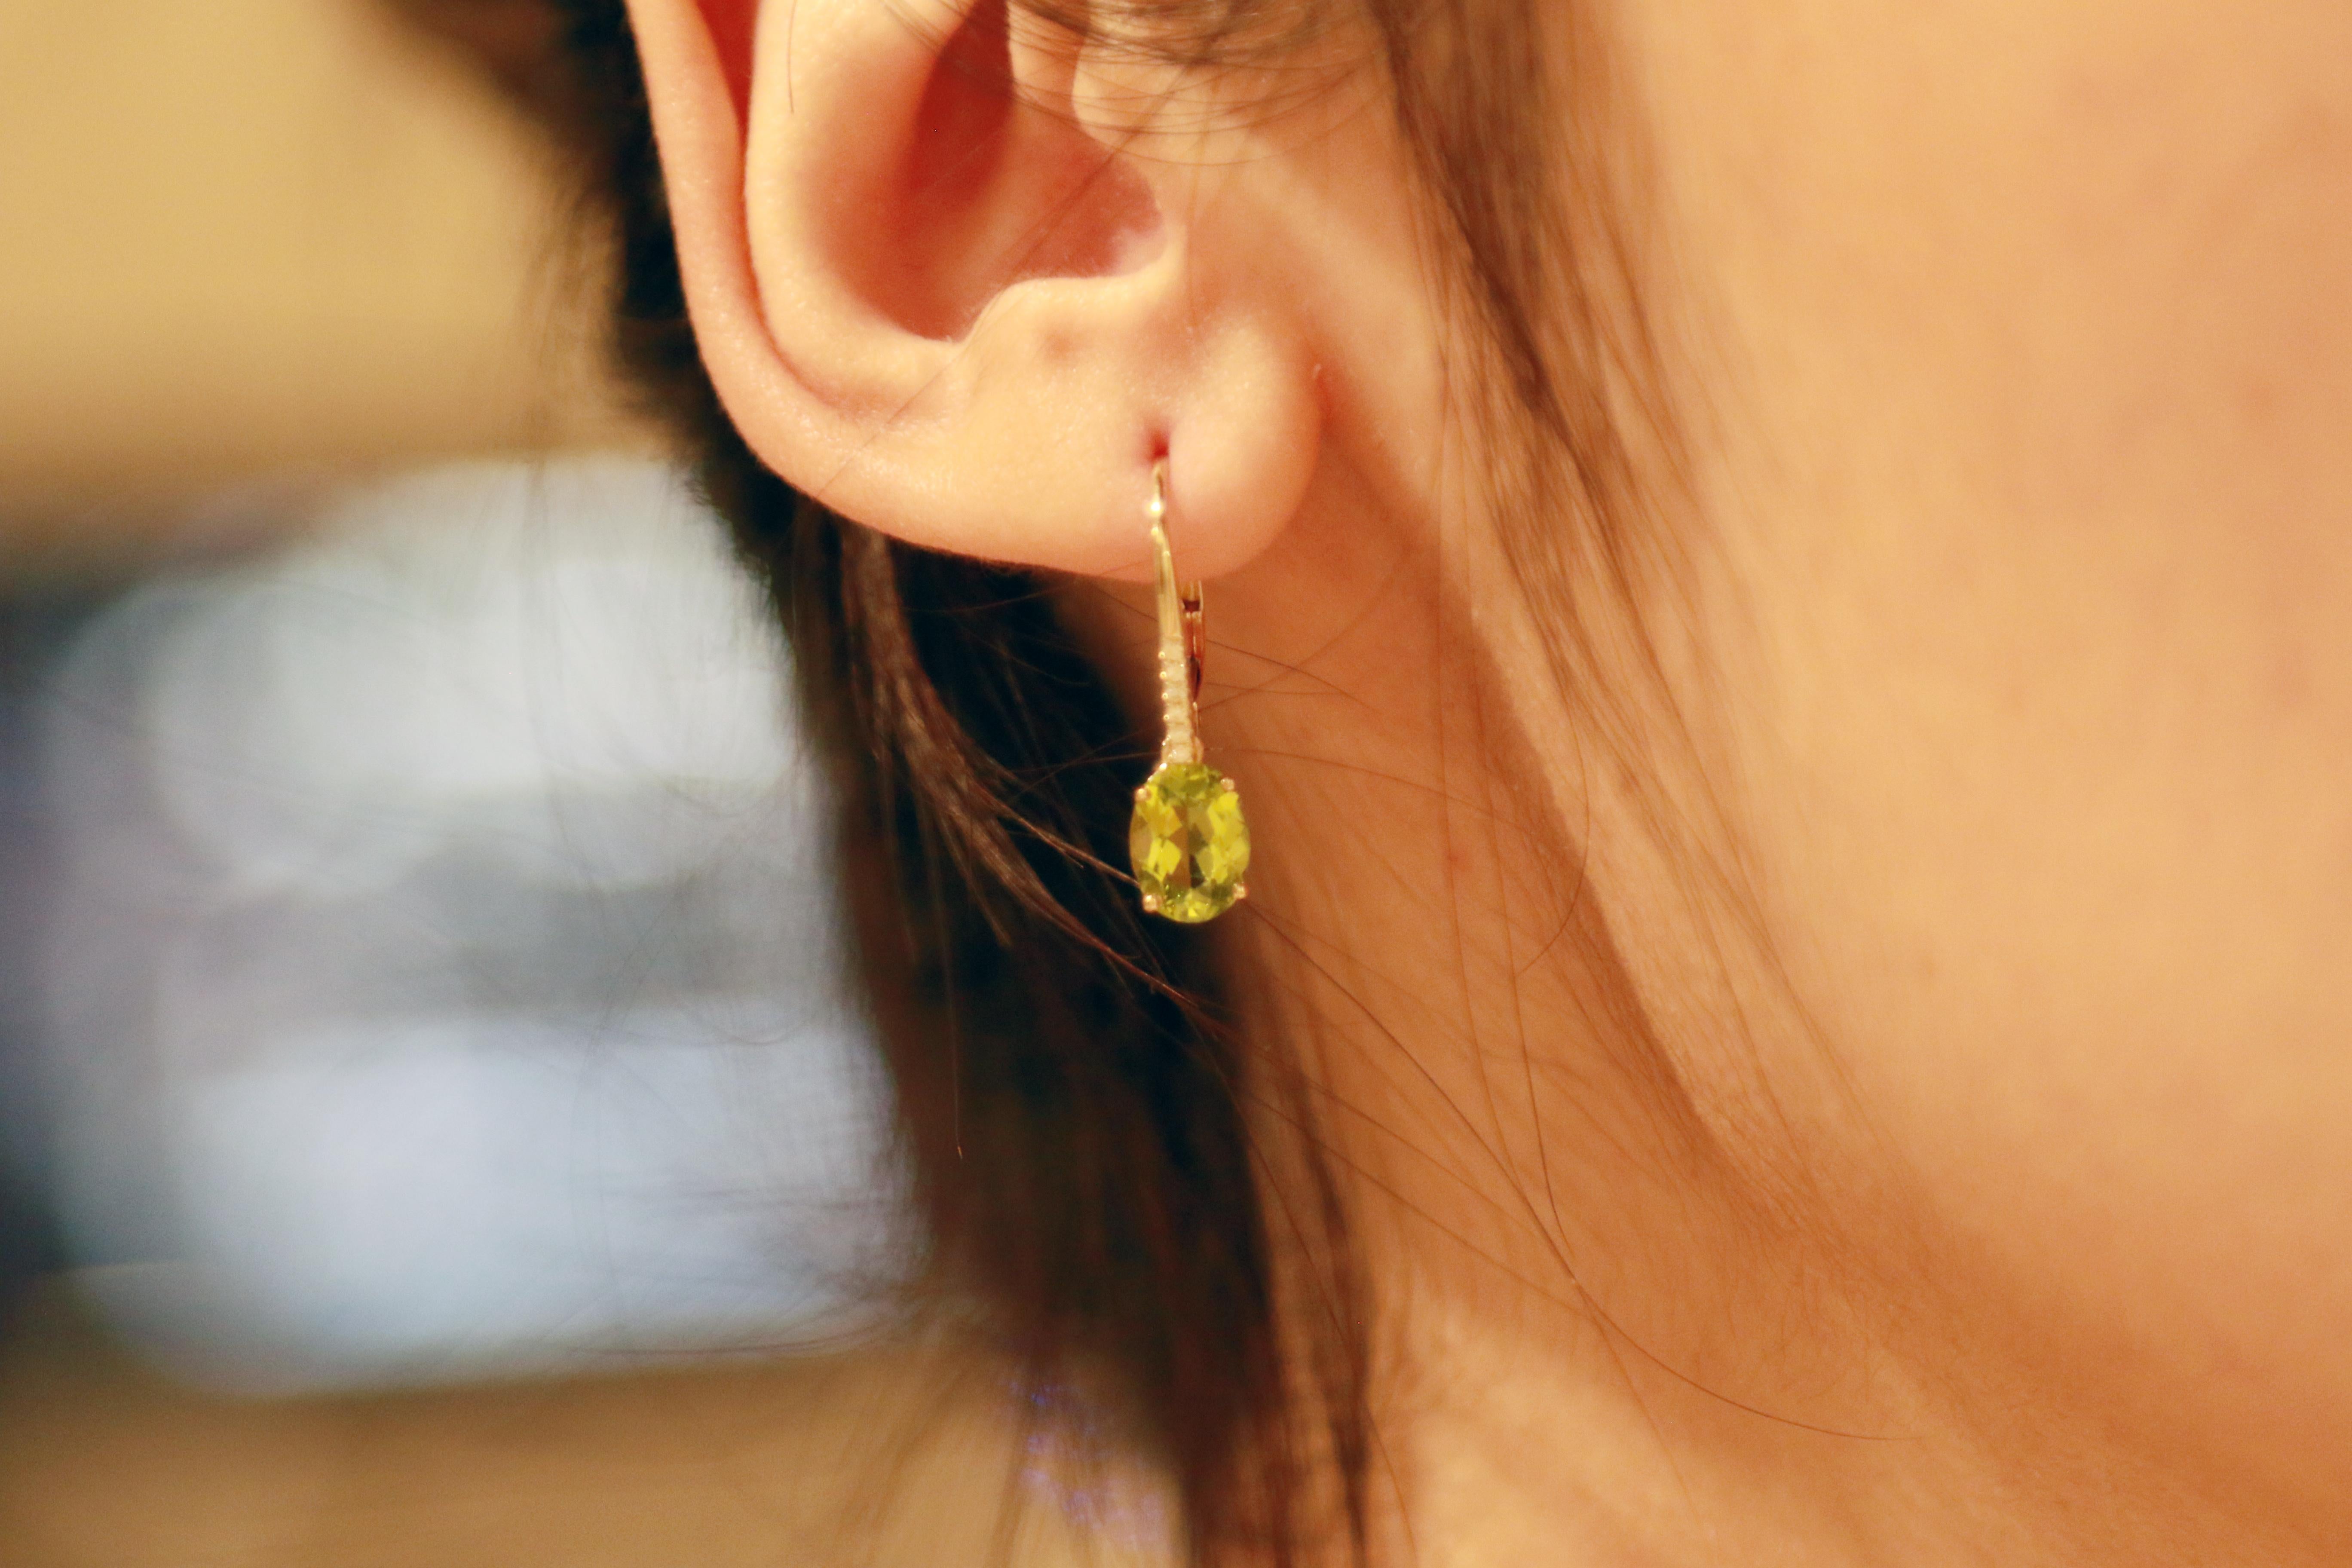 Decorate yourself in elegance with this Earring is crafted from 10K Yellow Gold by The Gin & Grace Earring. This Earring is made up of 5X7 Oval-Cut prong setting Genuine Peridot (2 pcs) 2.91 Carat and Round-Cut prong setting Diamond (12 pcs) 0.06